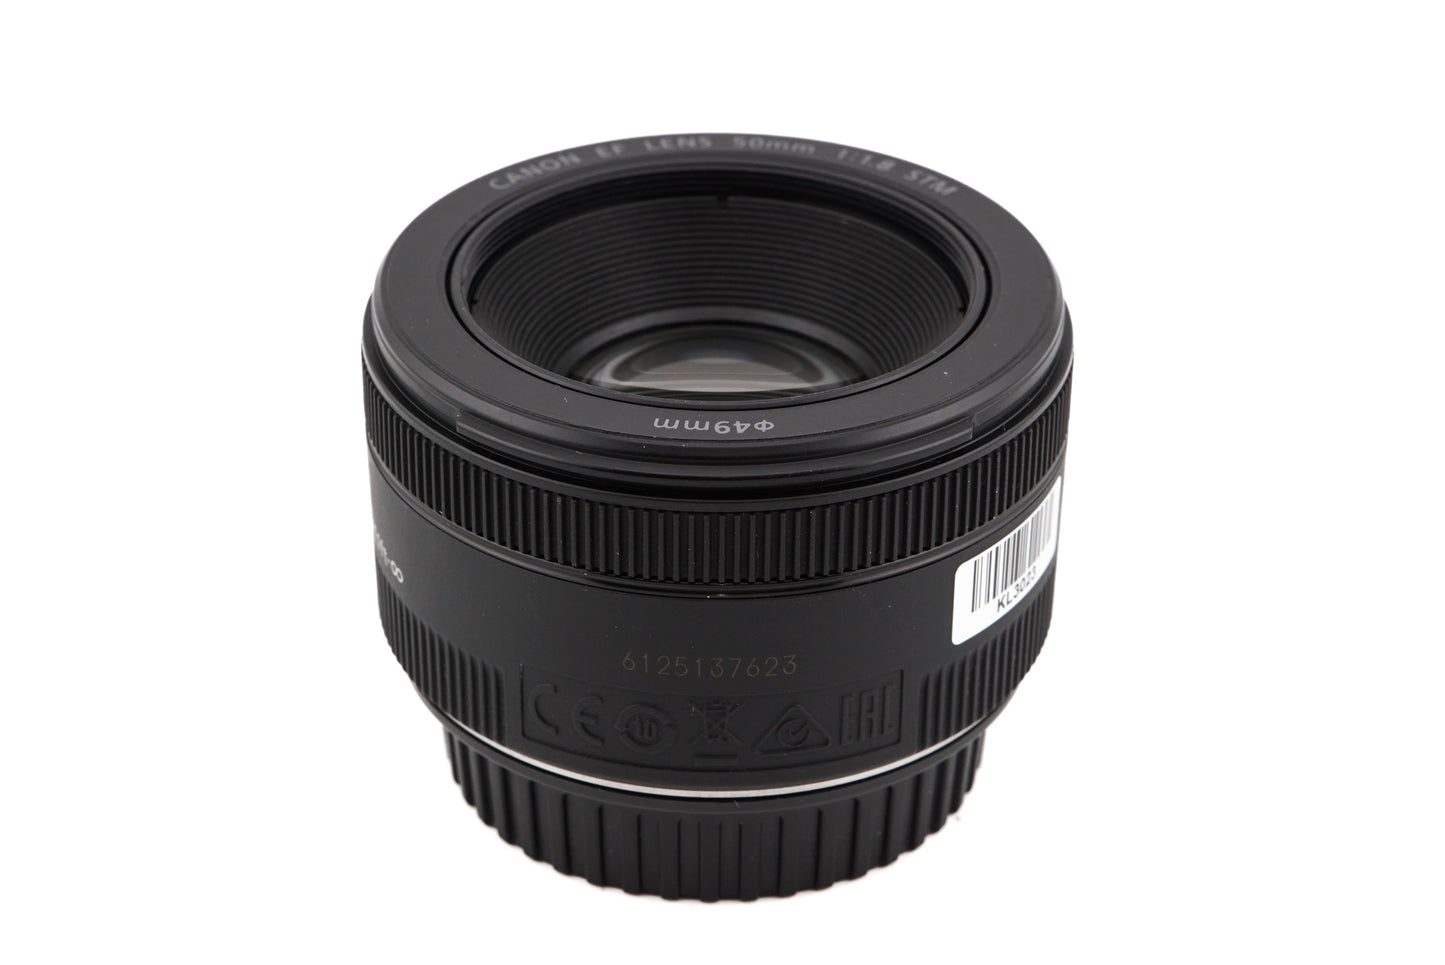 Canon 50mm f1.8 STM